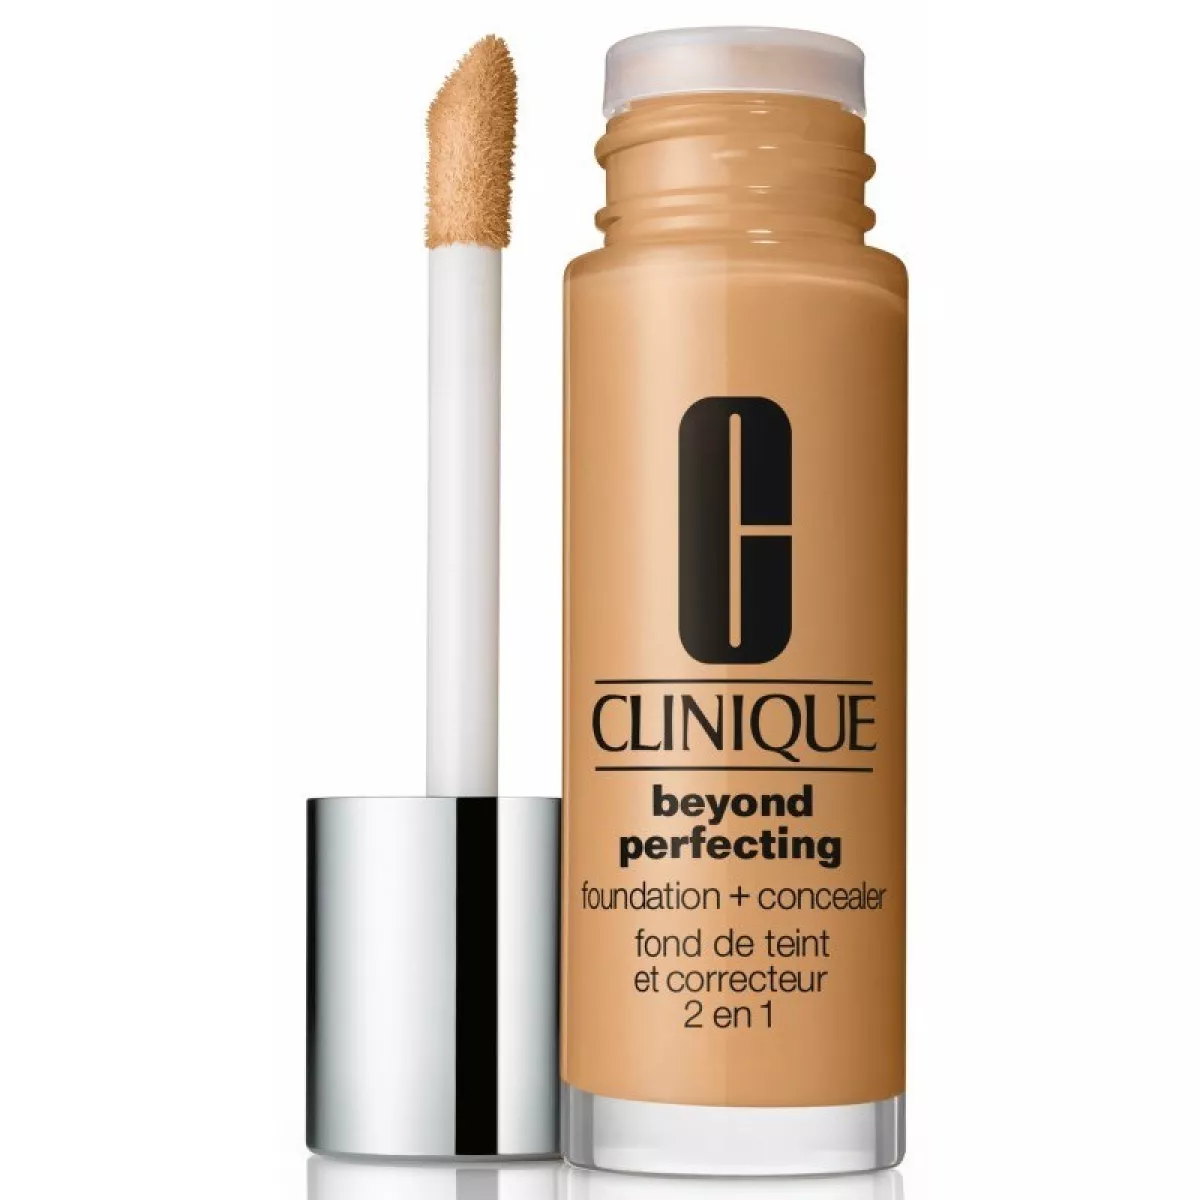 #1 - Clinique Beyond Perfecting Foundation + Concealer 30 ml - Toasted Wheat